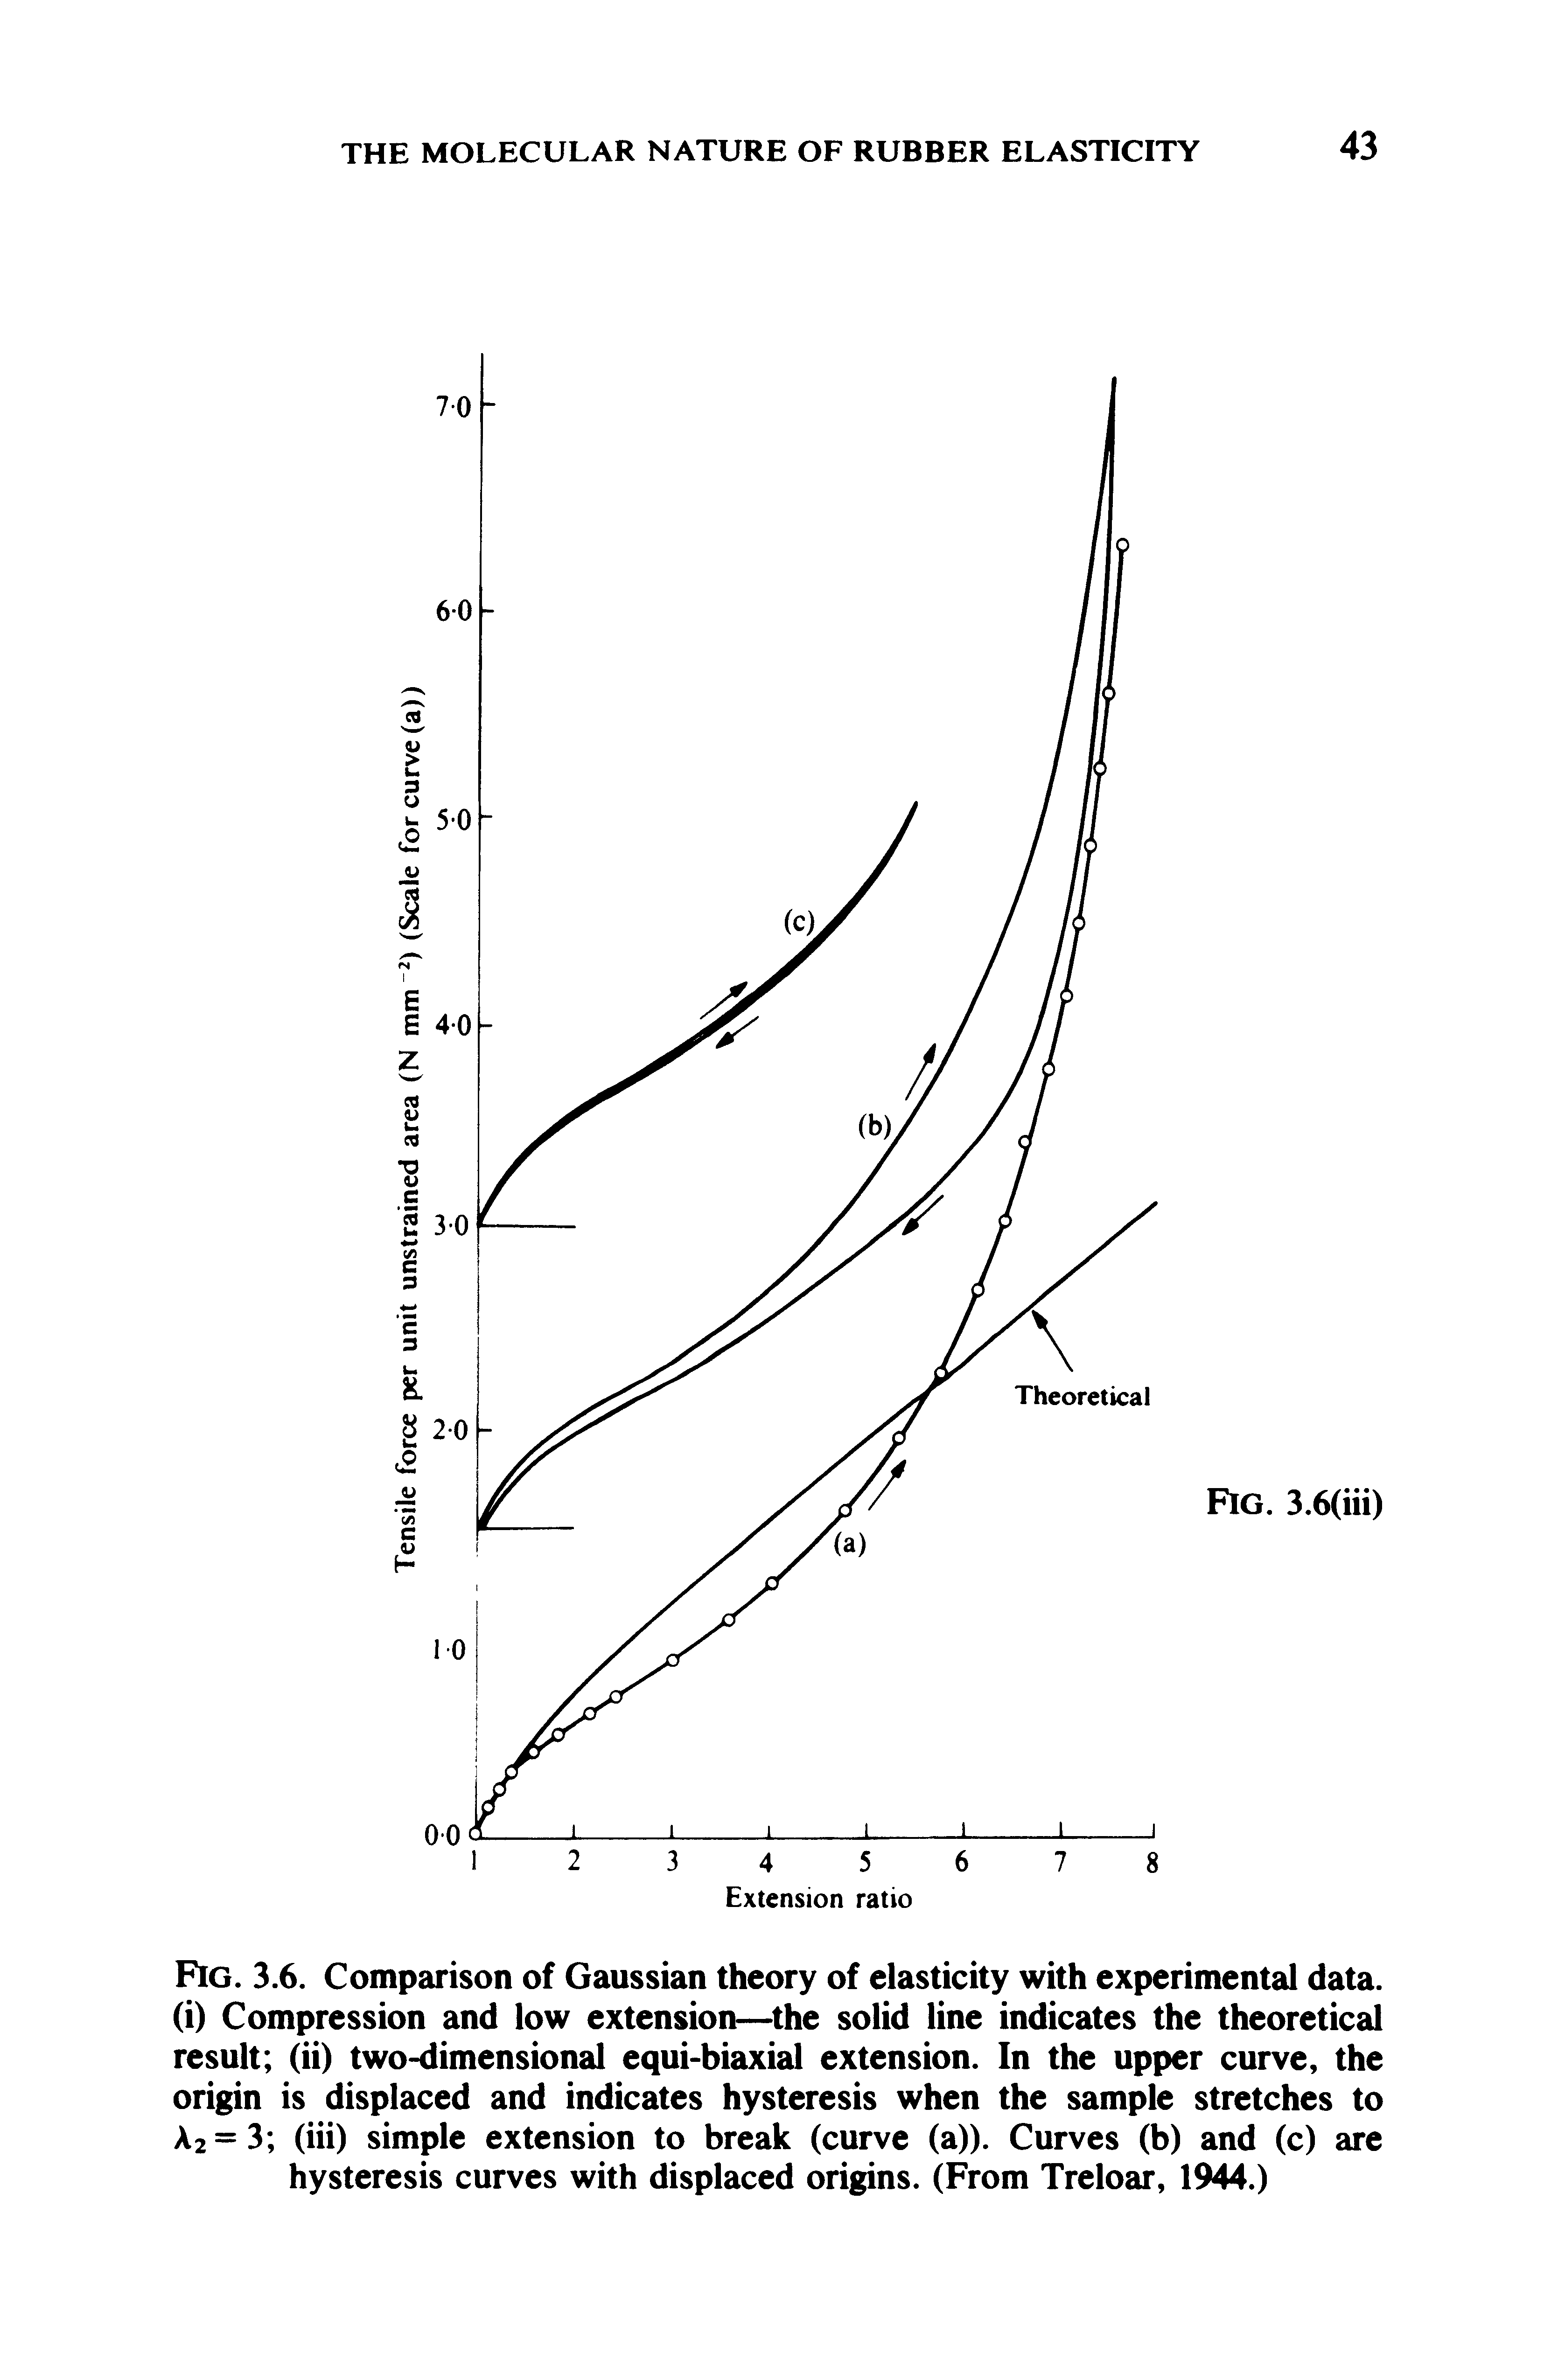 Fig. 3.6. Comparison of Gaussian theory of elasticity with experimental data, (i) Compression and low extension— the solid line indicates the theoretical result (ii) two-dimensional equi-biaxial extension. In the upper curve, the origin is displaced and indicates hysteresis when the sample stretches to A2=3 (iii) simple extension to break (curve (a)). Curves (b) and (c) are hysteresis curves with displaced origins. (From Treloar, 1944.)...